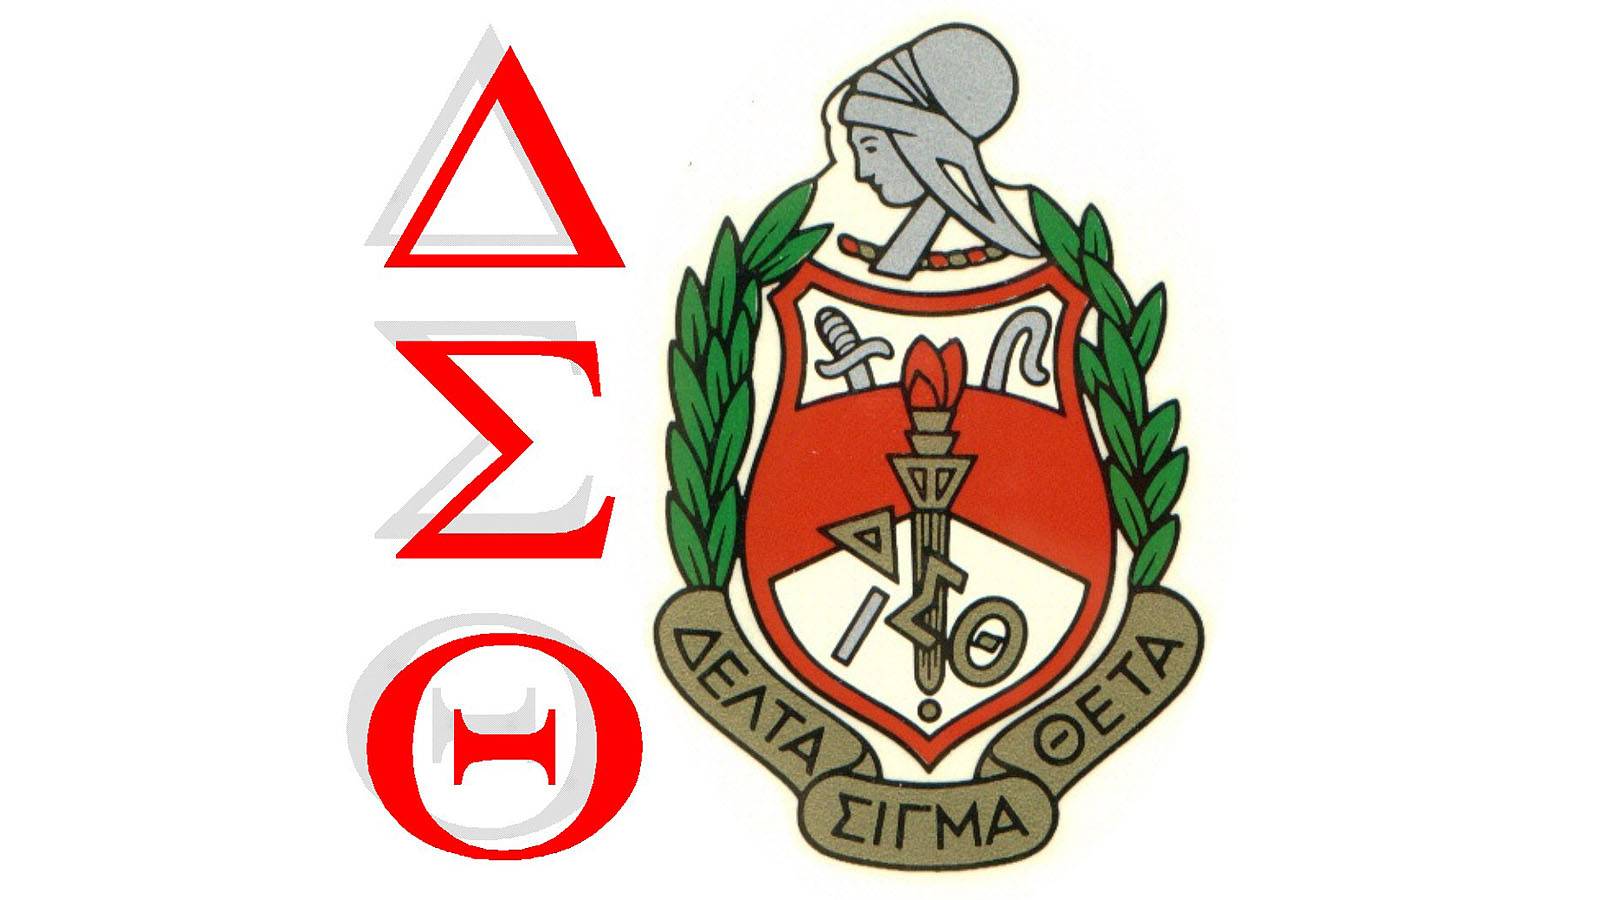 Delta Sigma Theta Sorority, Incorporated (1913) - Delta Sigma Theta Sorority, Incorporated was founded in 1913 on the campus of Howard University by 22 women that looked to promote academic excellence and service to those less fortunate than themselves. Notable members include Roberta Flack and Natalie Cole.(Photo: Delta Sigma Theta)